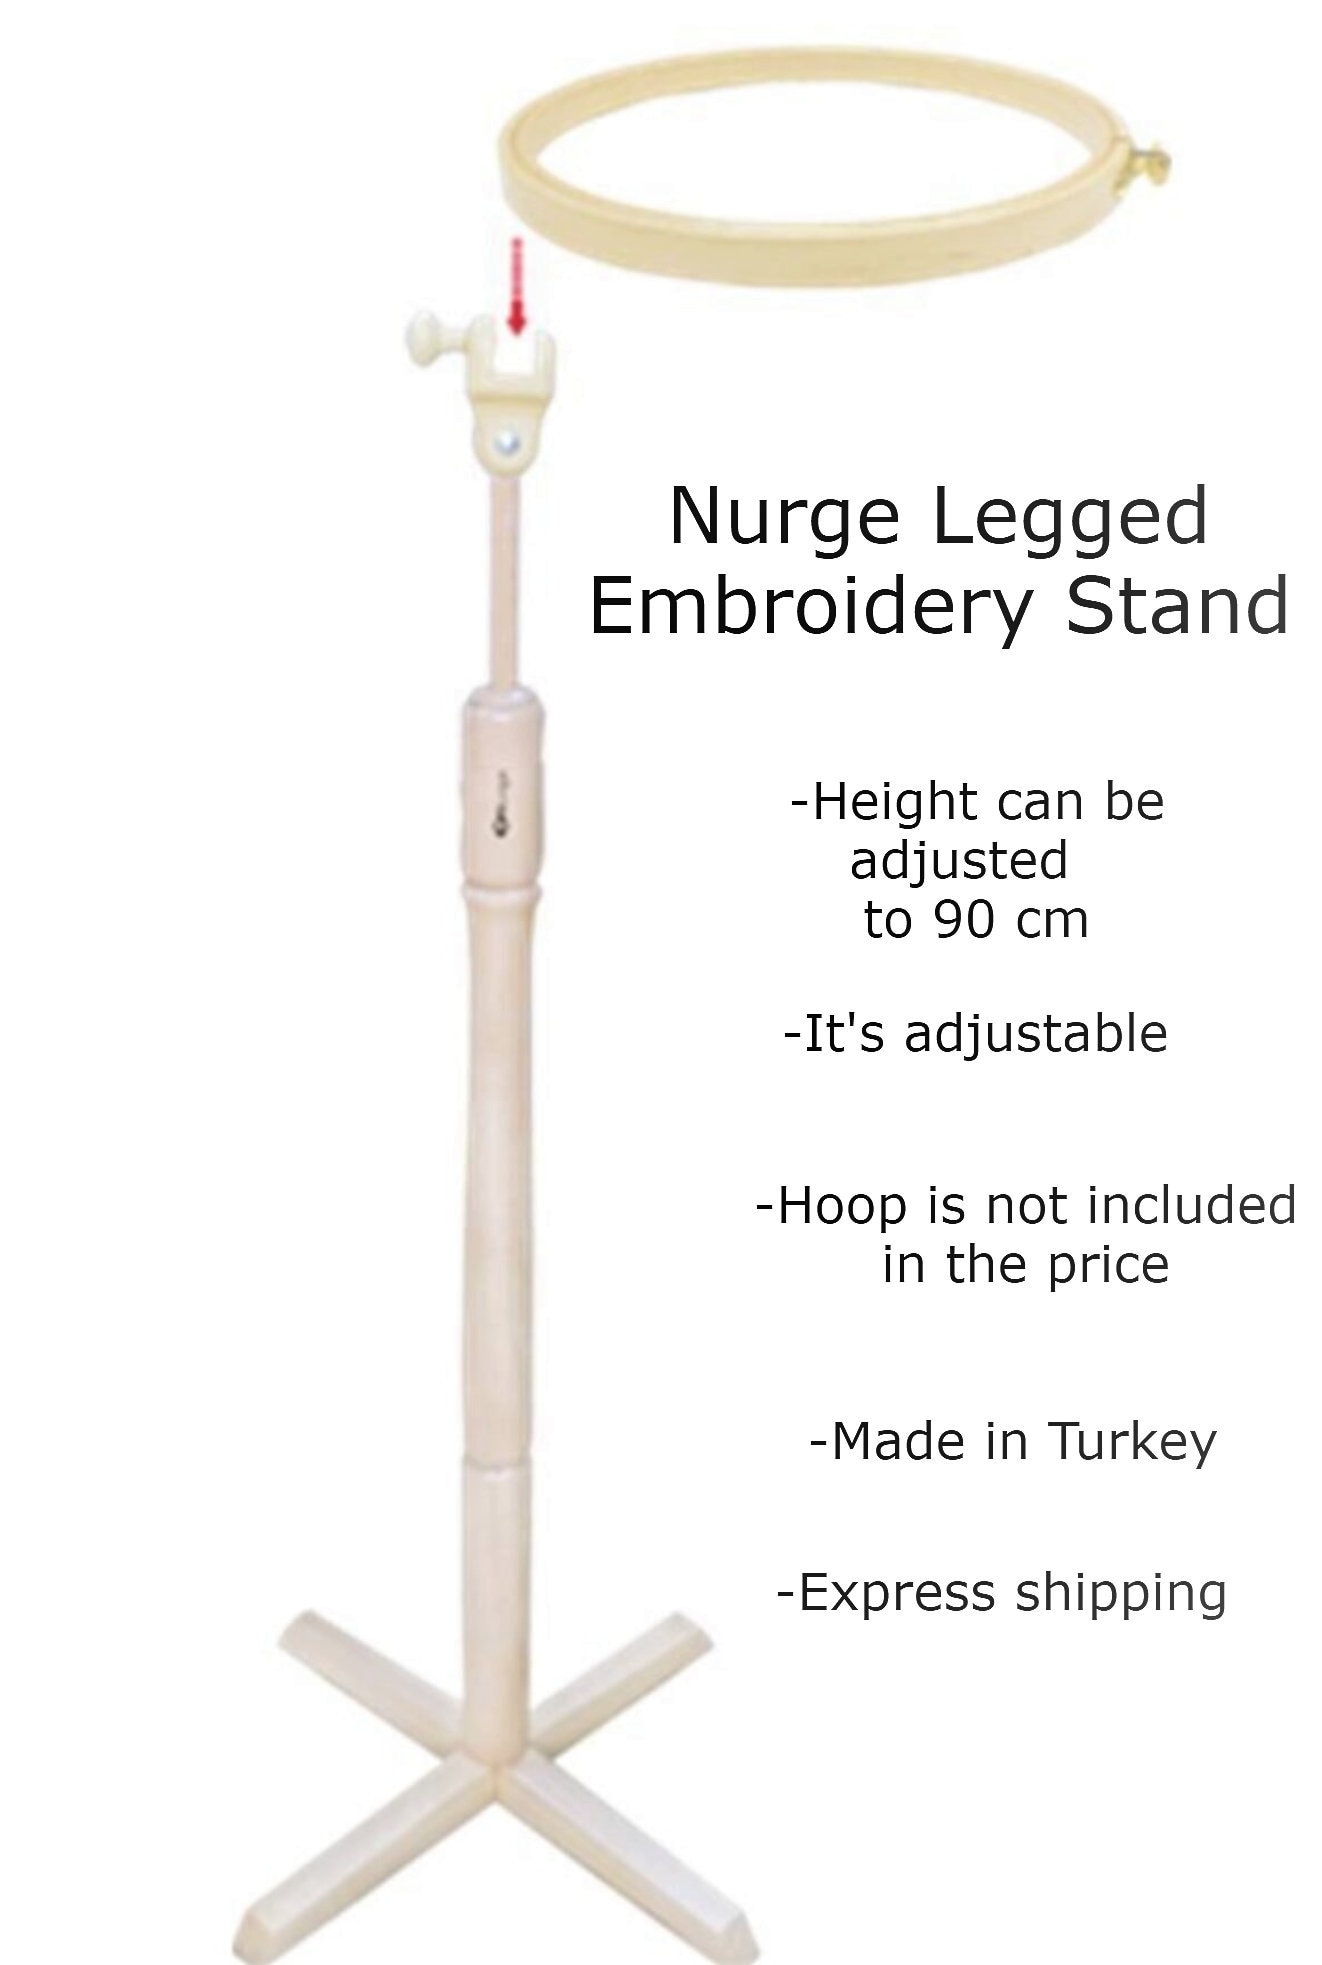 Nurge Embroidery Cross Stitch Tapestry Hoop Ring Table Seat Stand